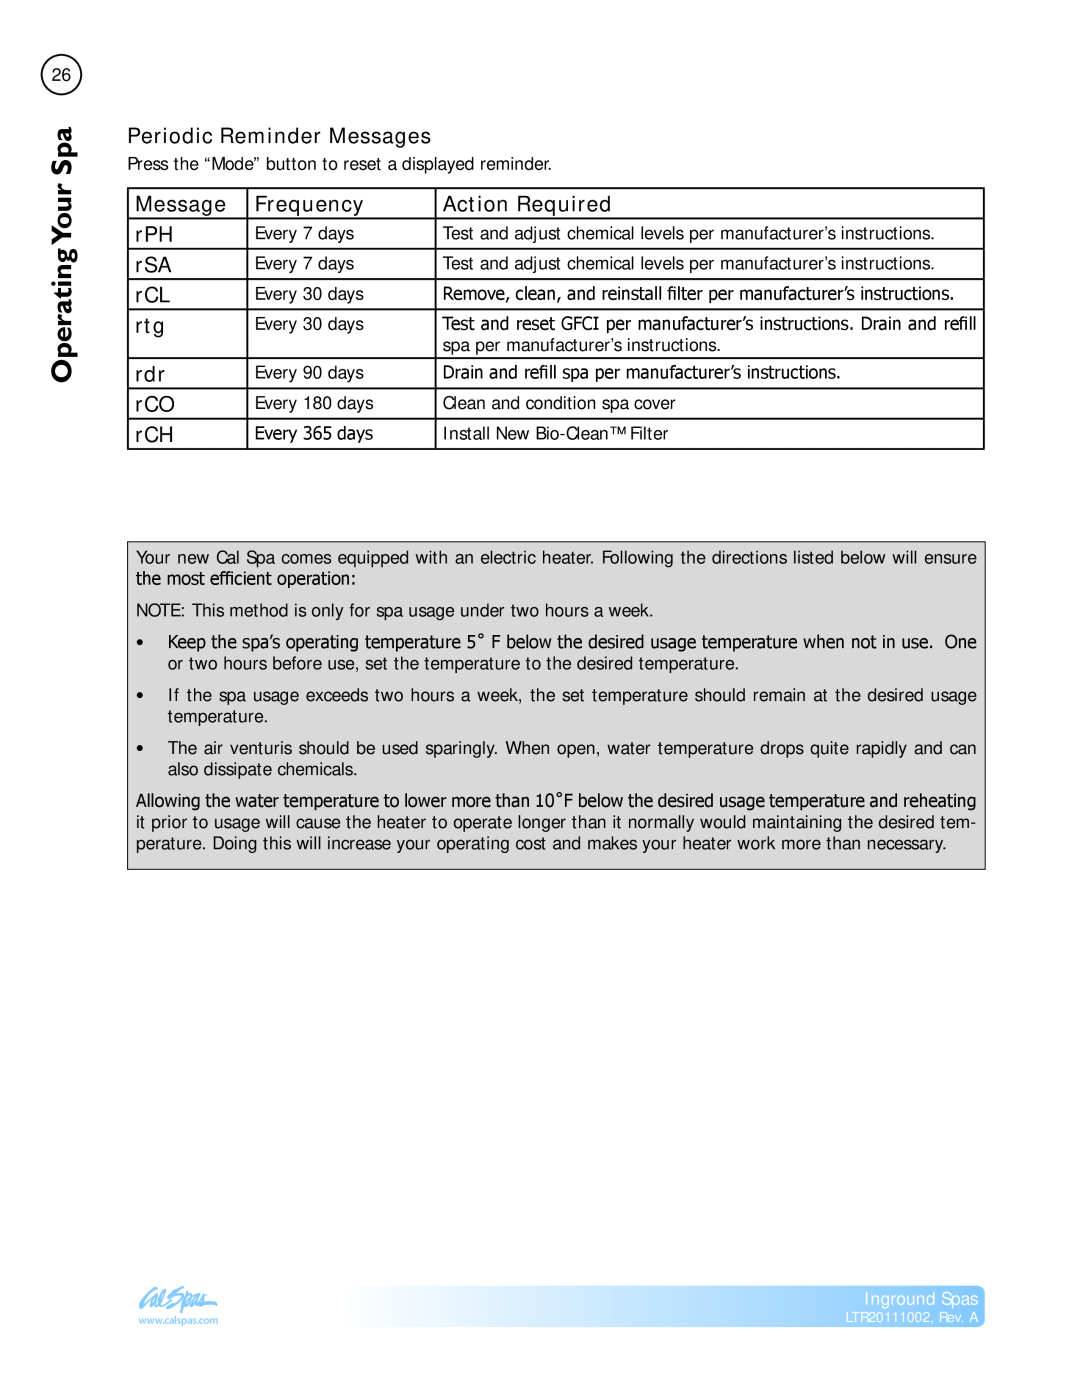 Cal Spas LTR20111002 manual Operating SpaYour, Periodic Reminder Messages, Frequency, Action Required 